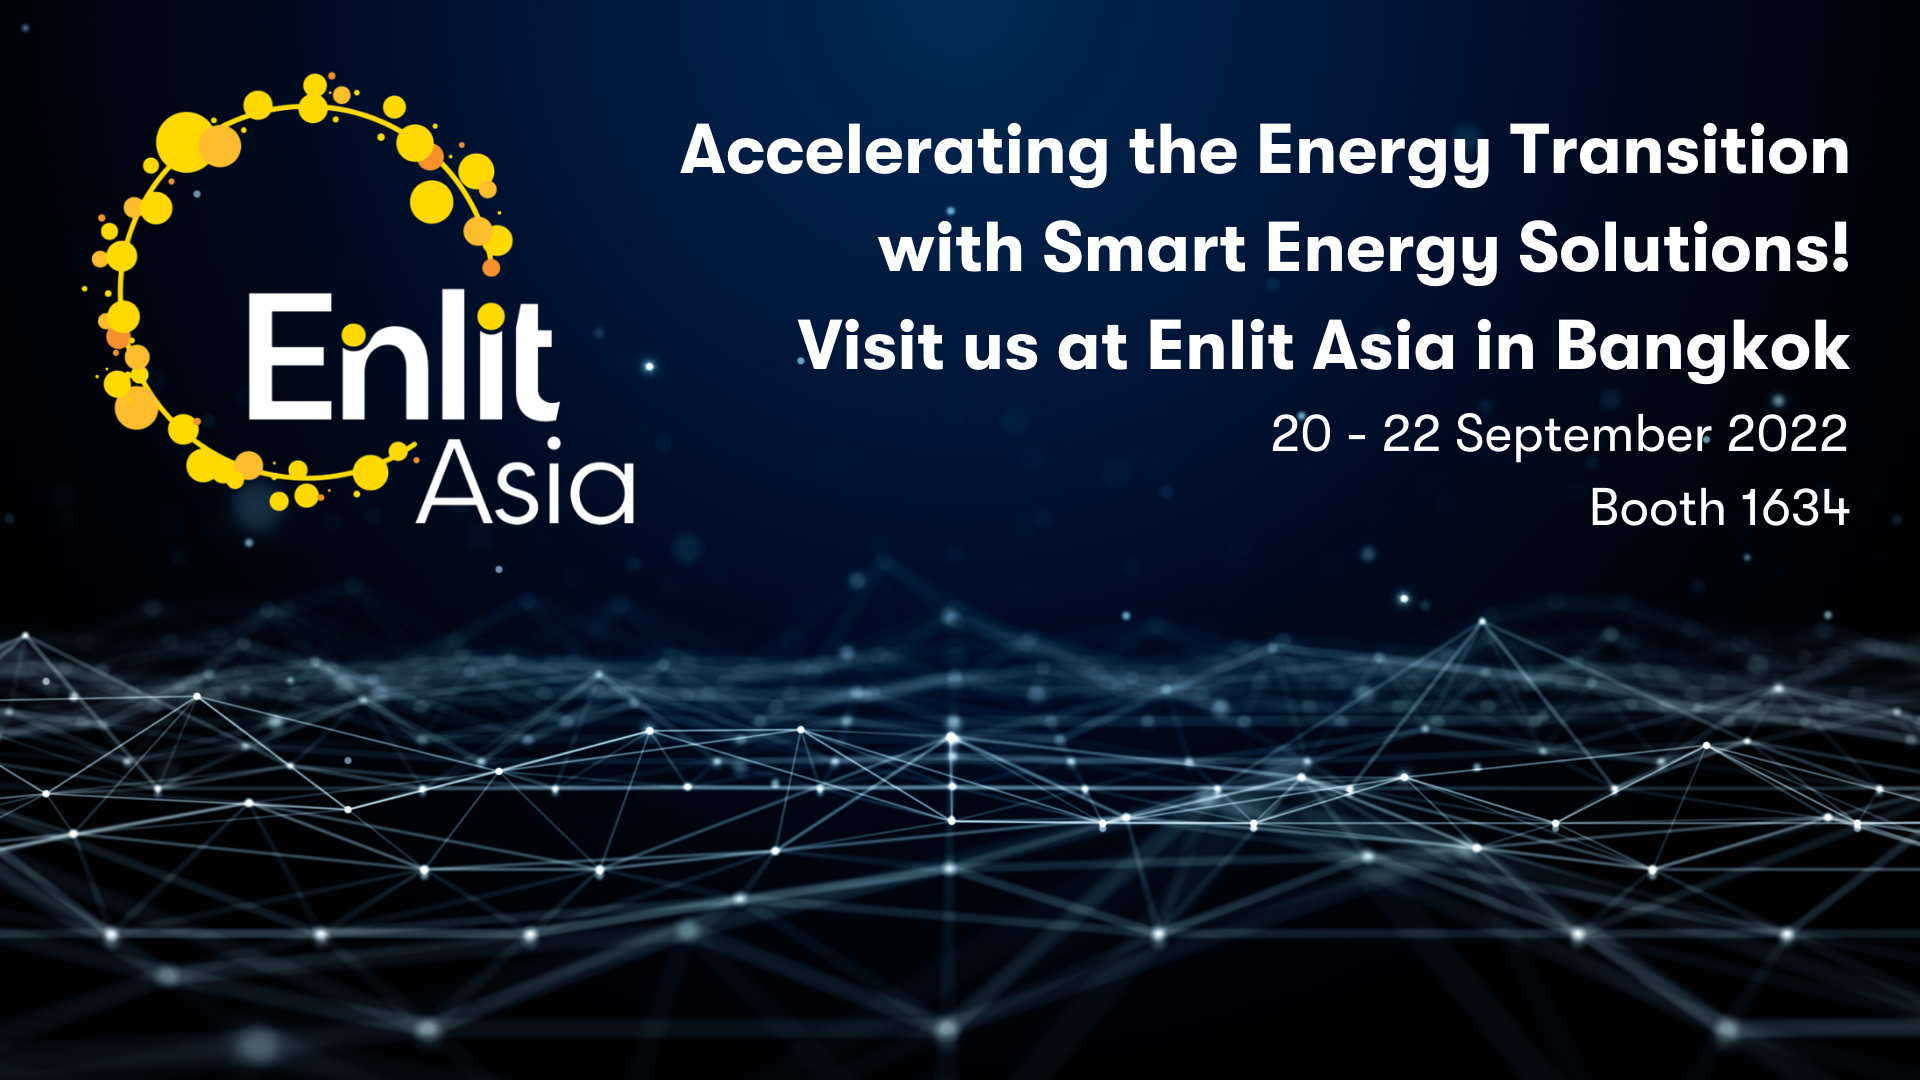 uploads/pics/https://www.steag-energyservices.com/uploads/pics/Accelerating_the_Energy_Transition_with_Smart_Digital_Solutions_Visit_us_at_Enlit_Asia_in_Bangkok__1__03.png